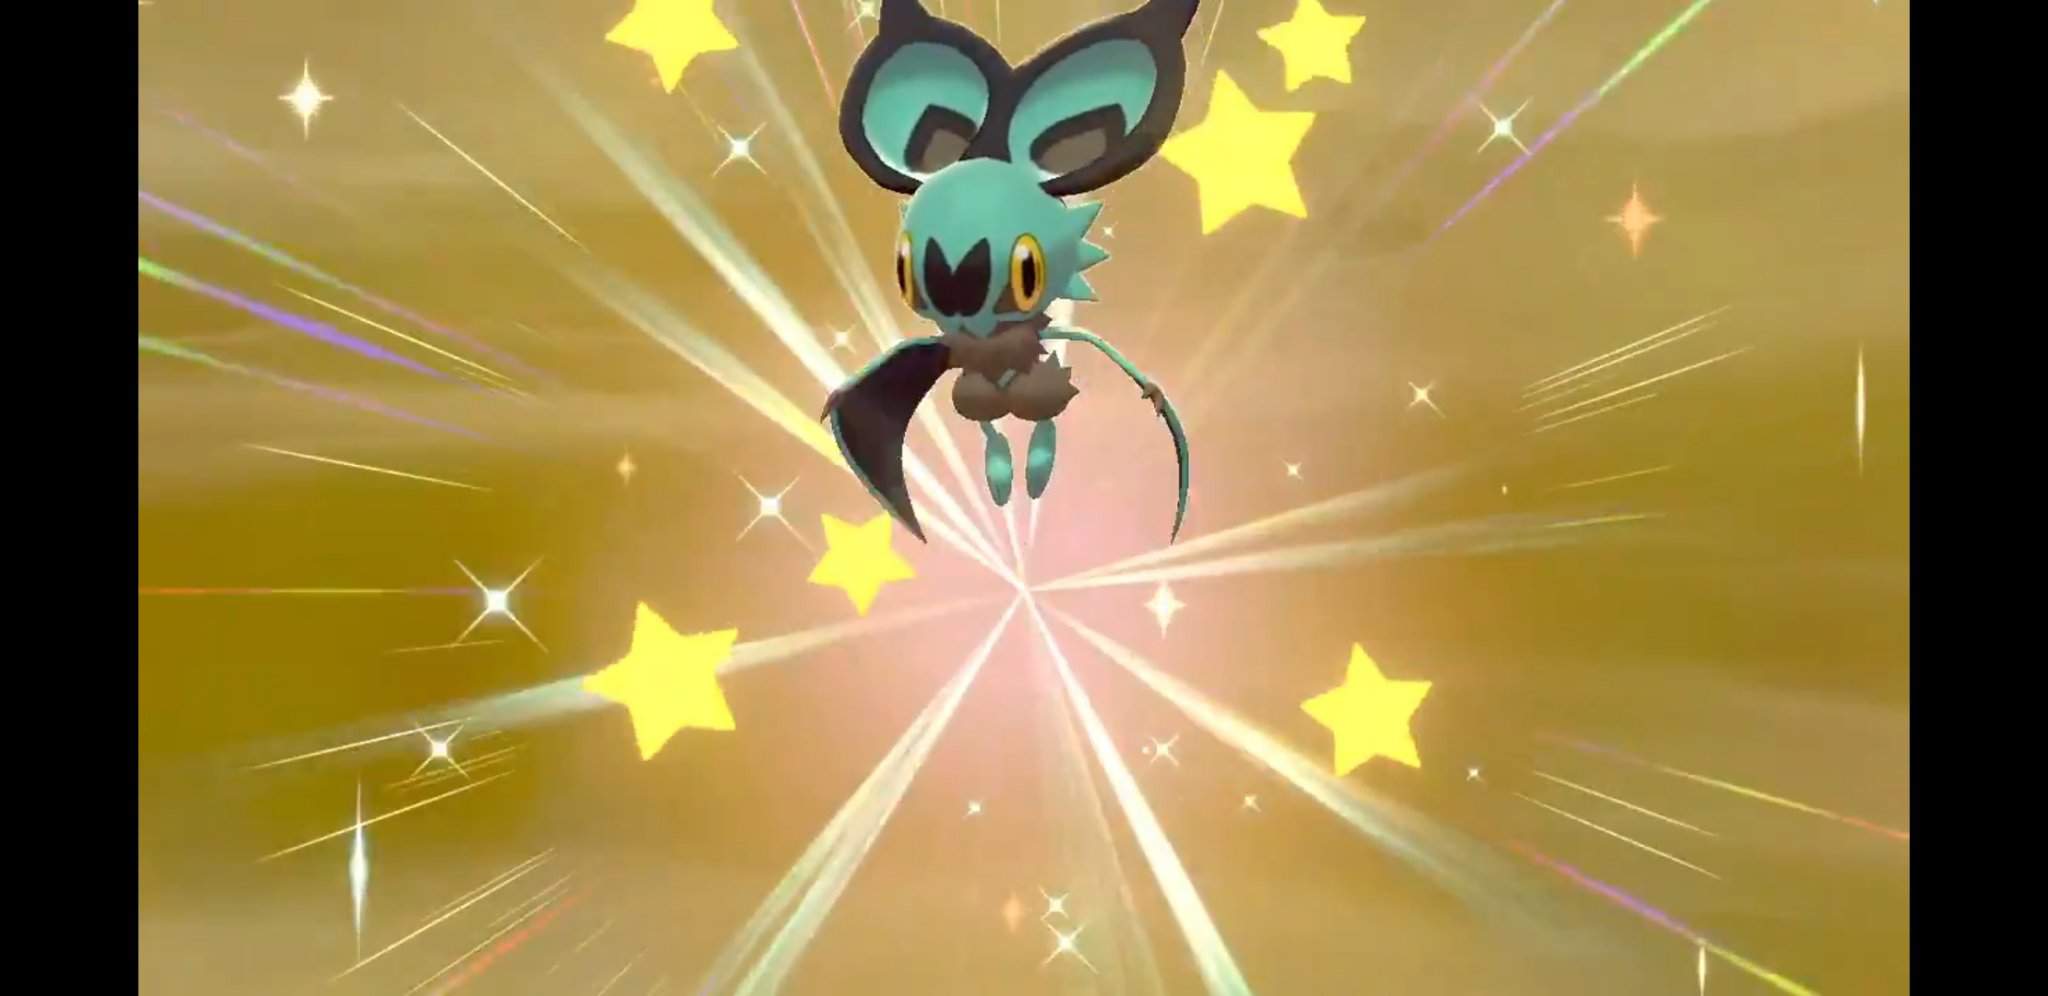 A shiny Noibat hatching from an egg in Pokemon Sword/Shield.